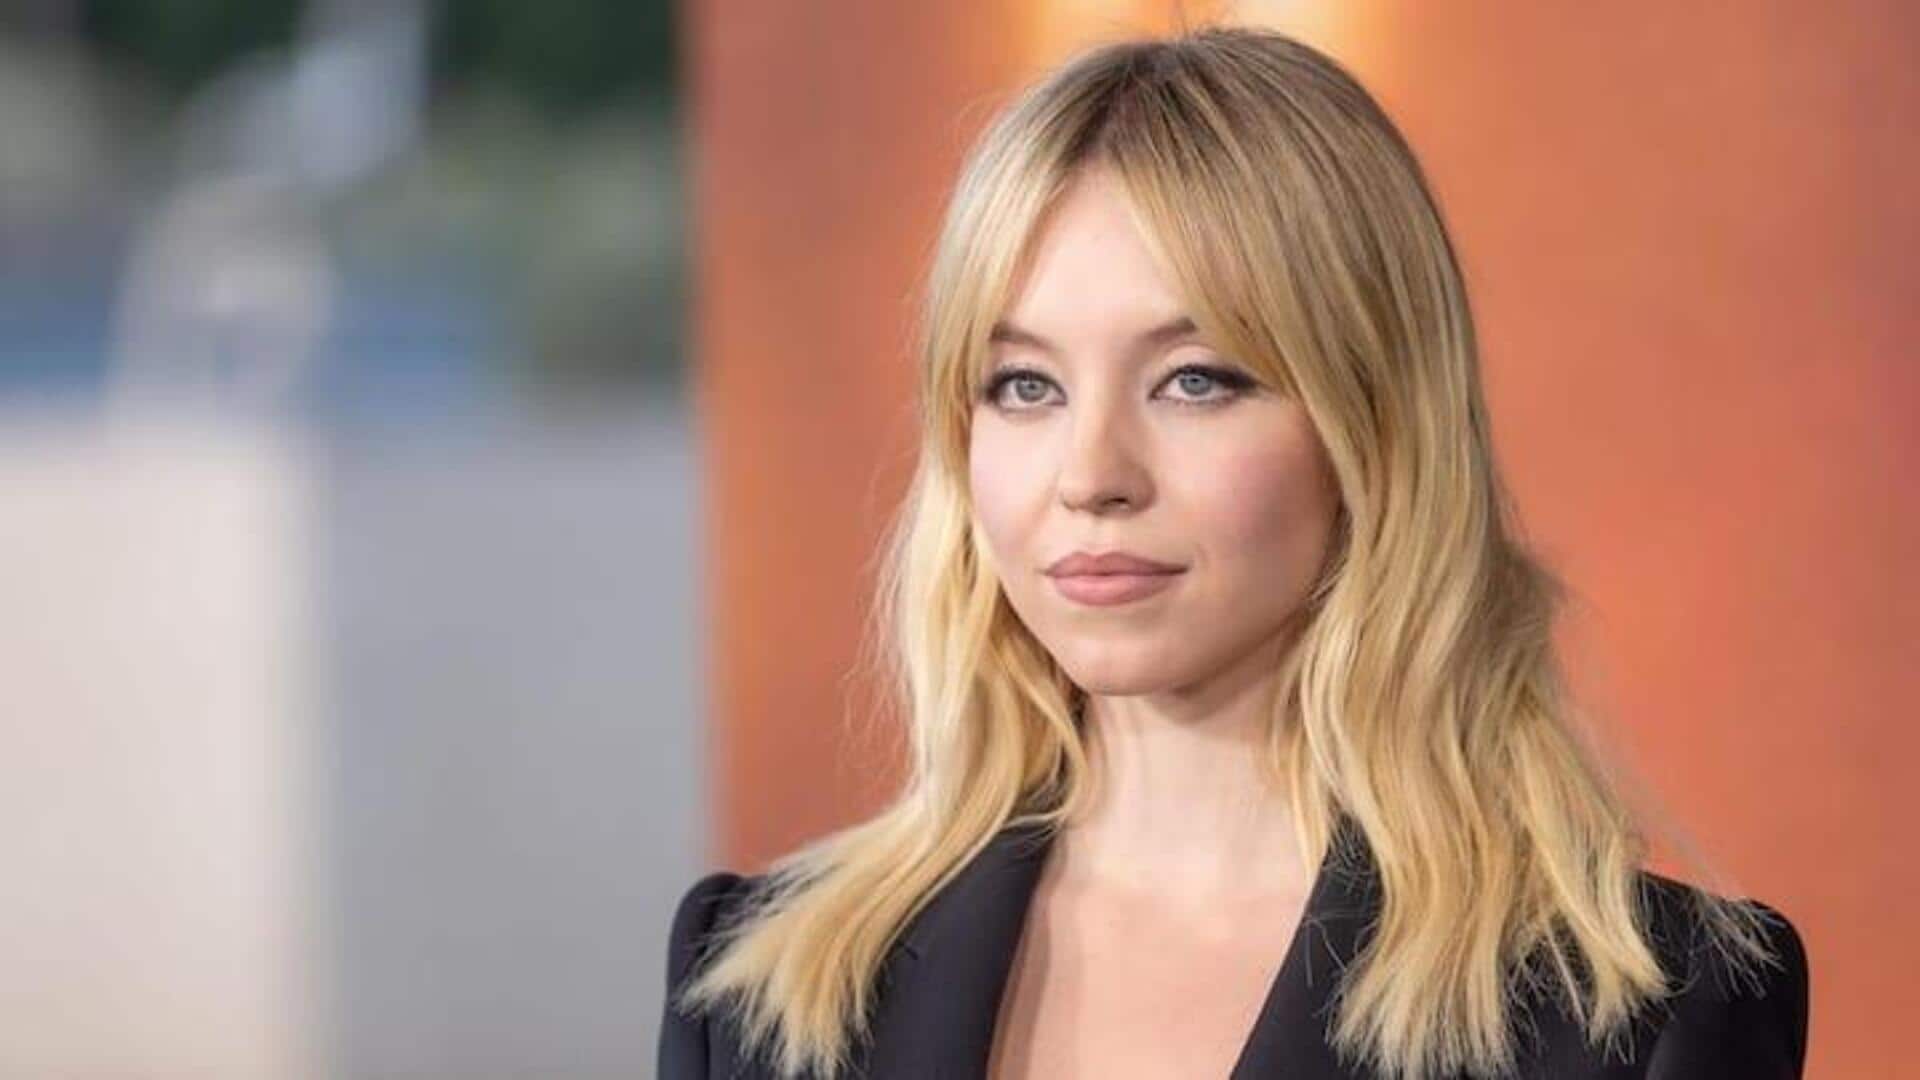 Sydney Sweeney responds to Hollywood producer's 'not pretty' comment